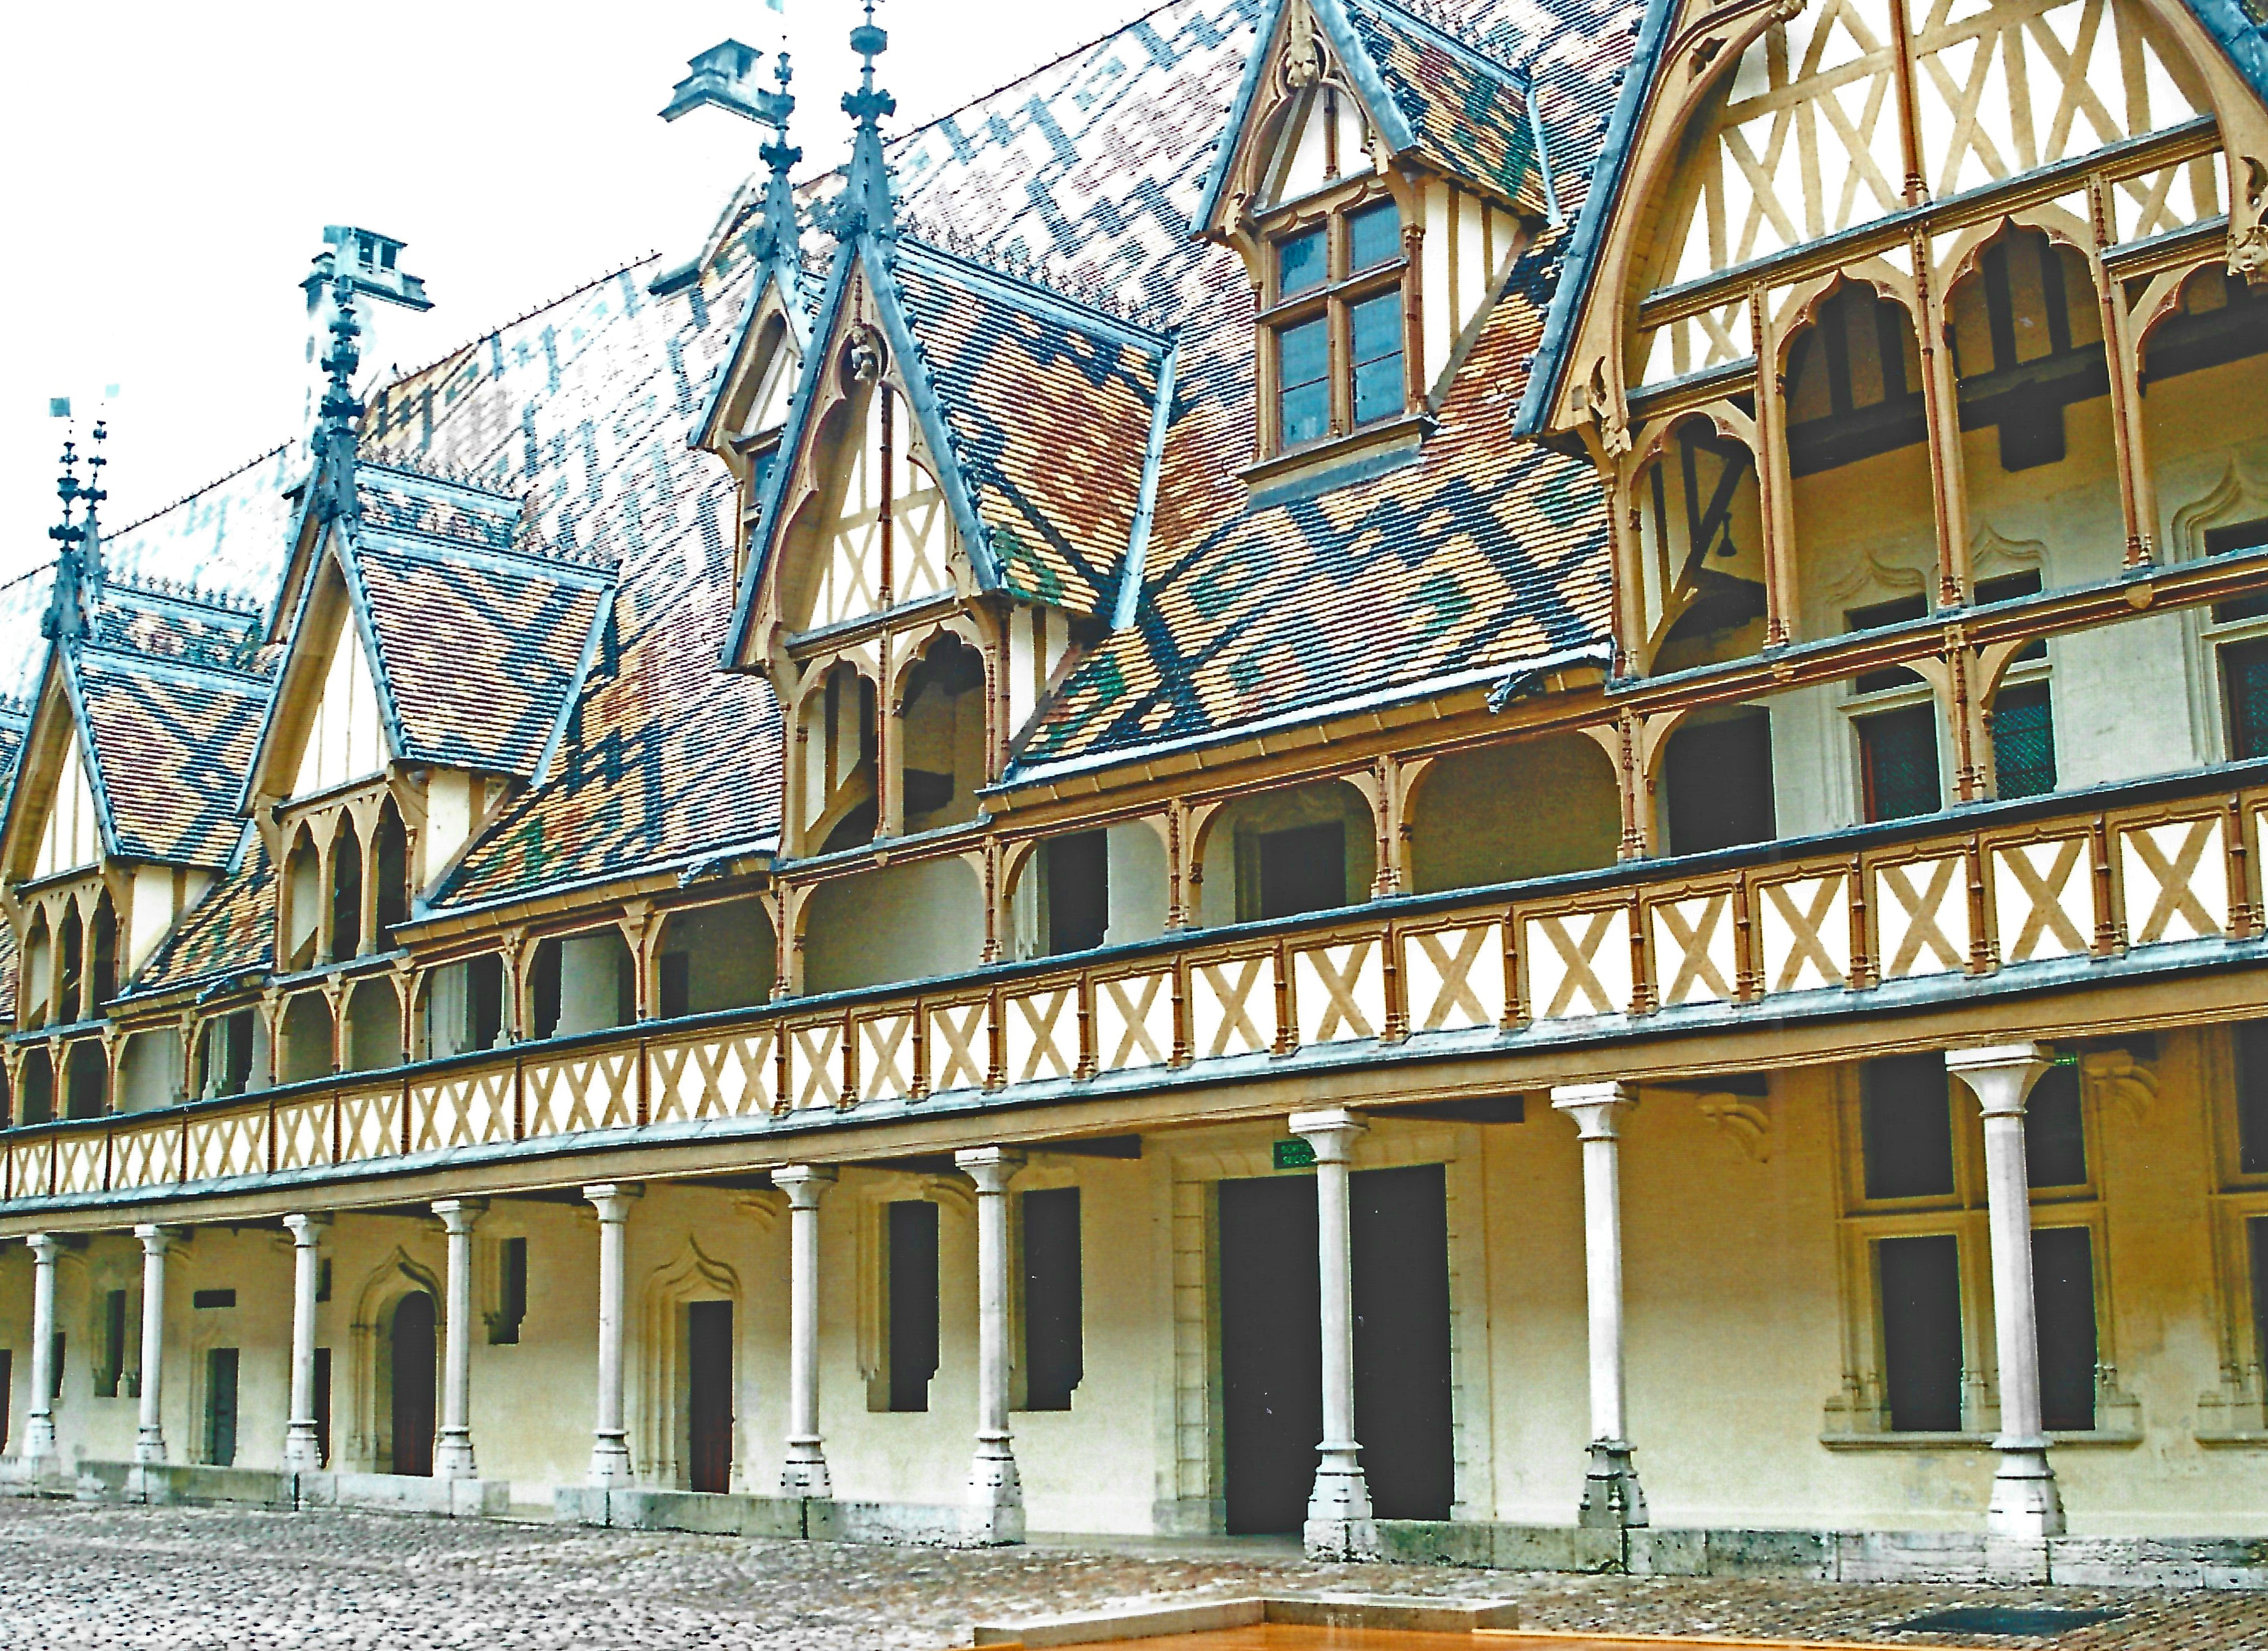 the hospice de Beaune is the scene of the yearly wine auction of Burgundy wines